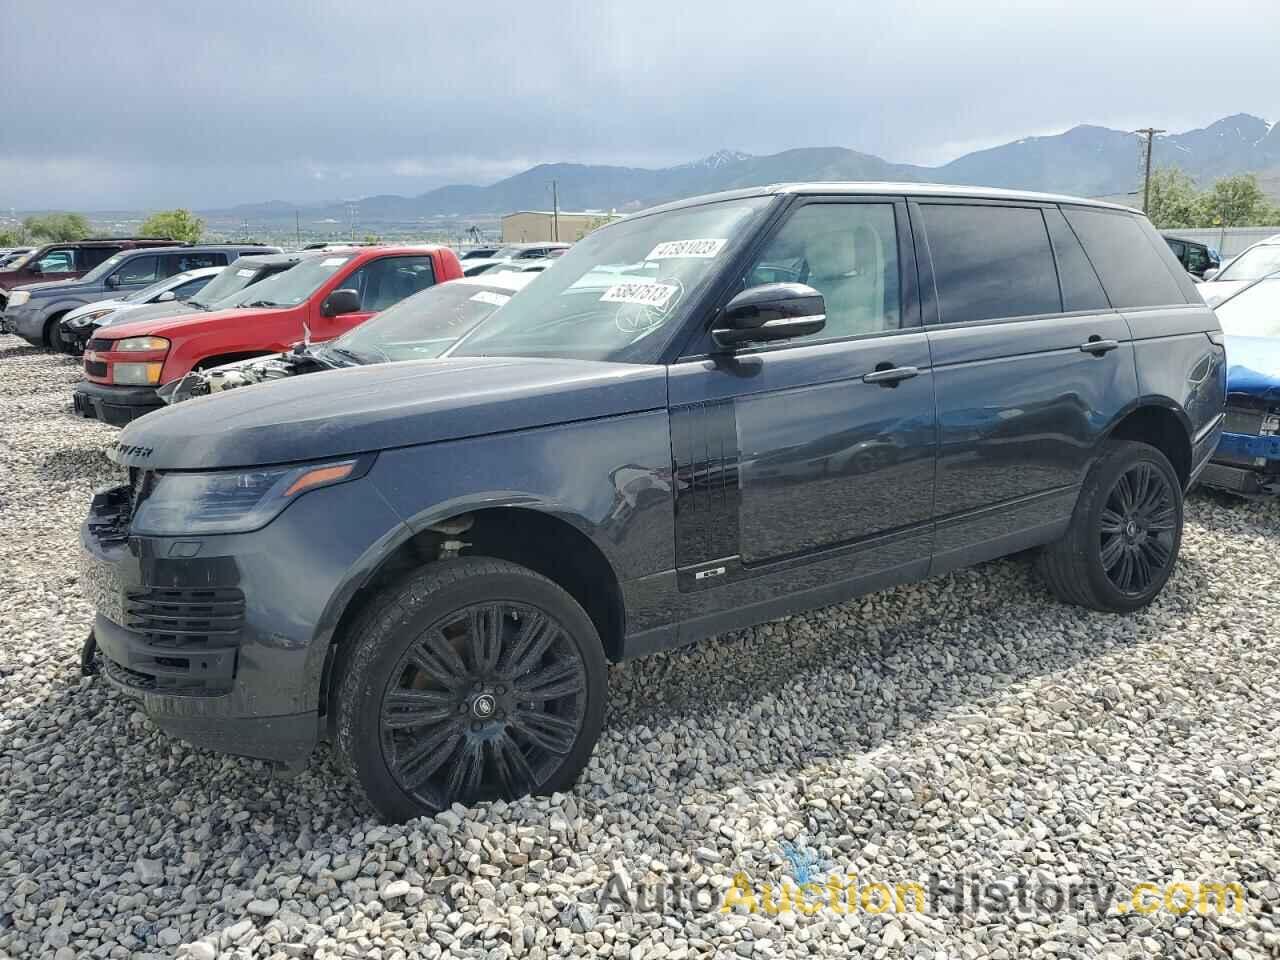 2021 LAND ROVER RANGEROVER WESTMINSTER EDITION, SALGS5SE2MA422312